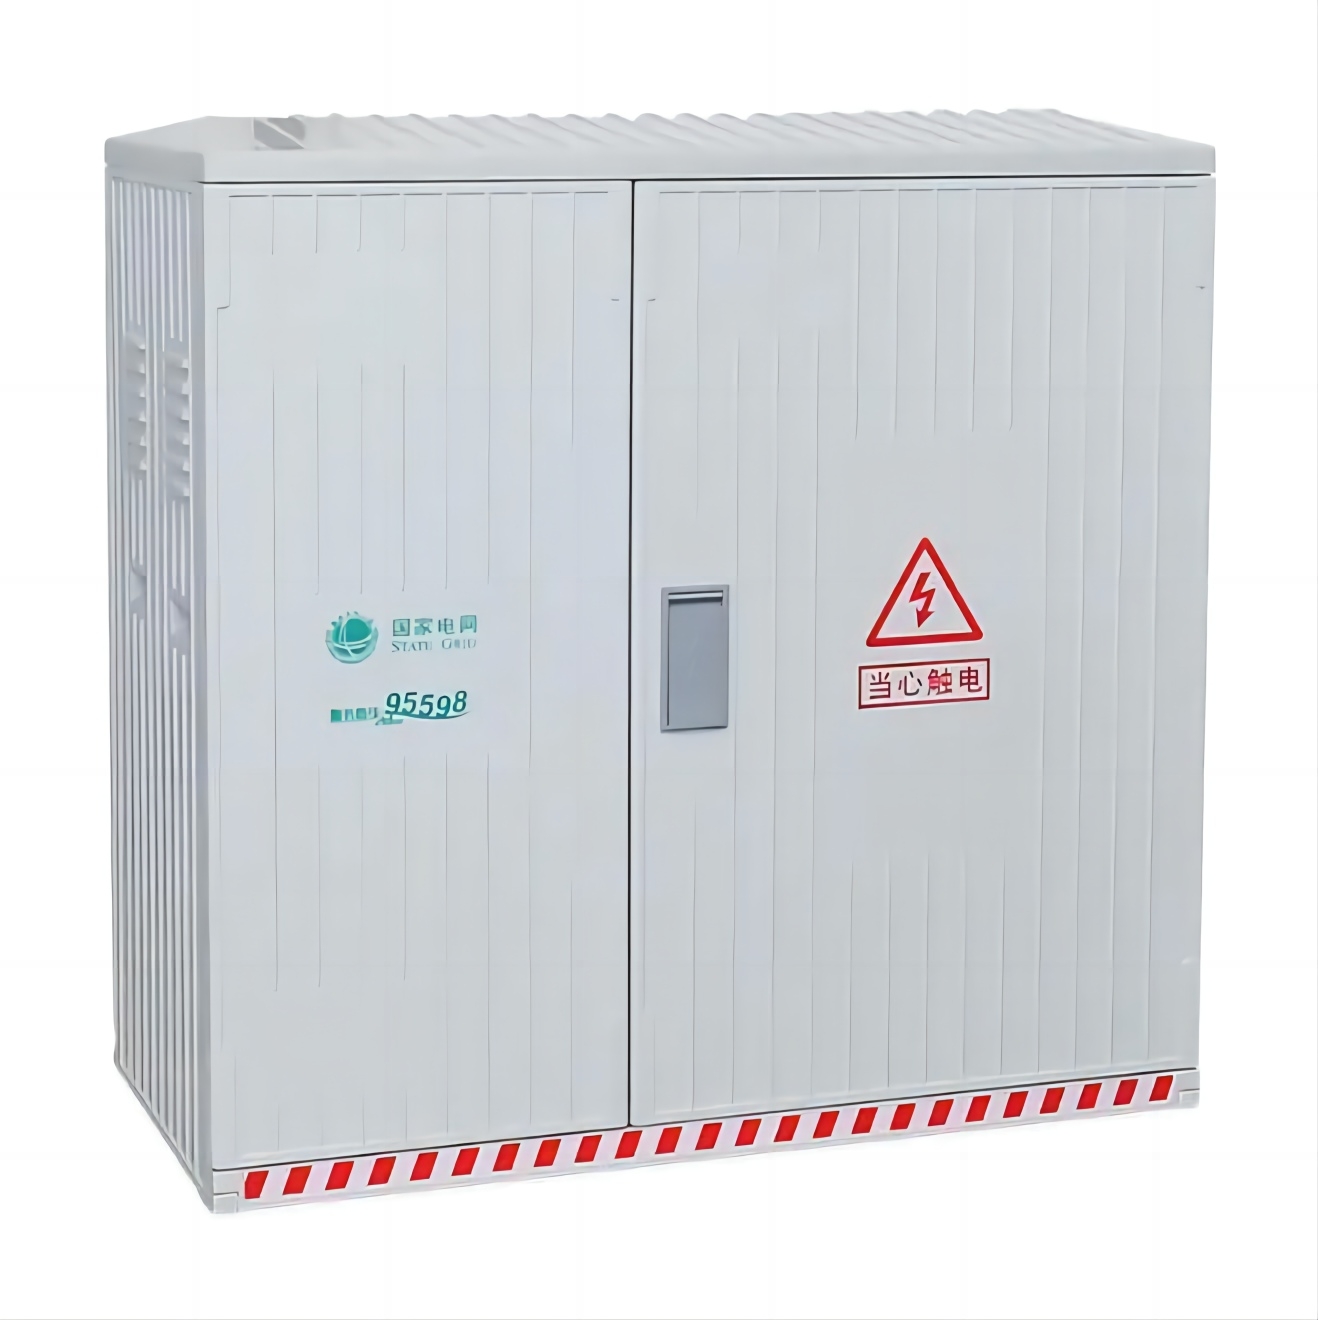 SMC 3800V 1000A  low-voltage  cable distribution box: reliable power distribution for industrial and civil buildings